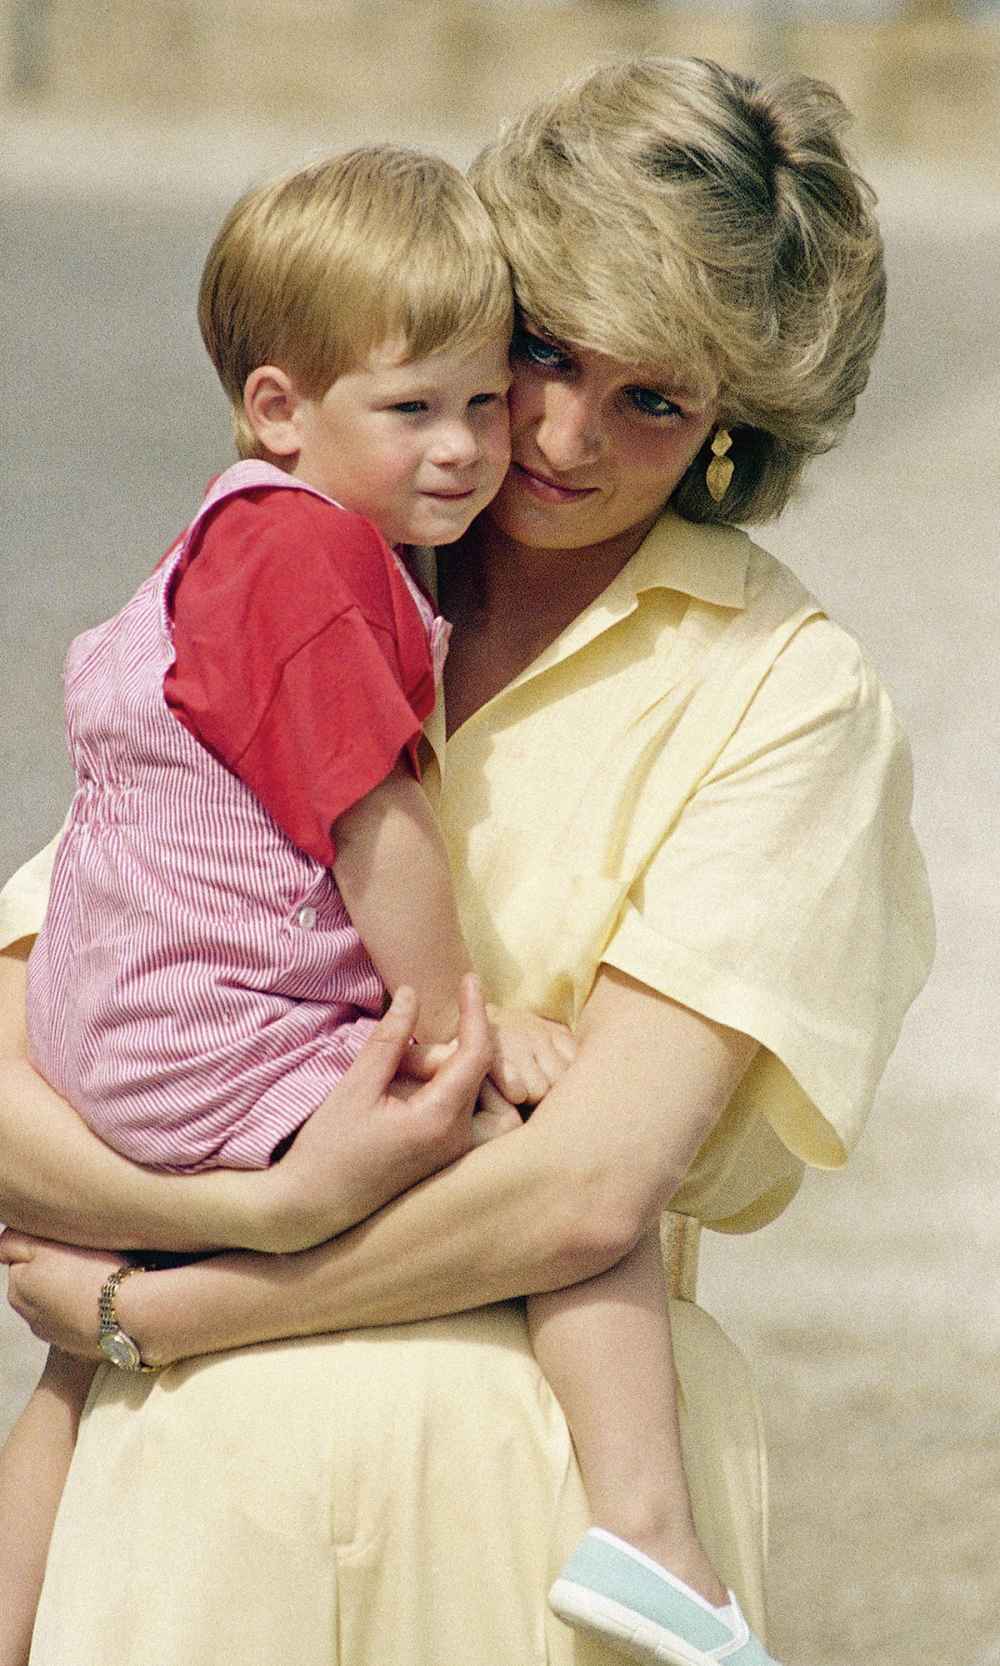 Prince Harry Says Princess Diana's Death Left 'a Huge Hole' in Him in Emotional Book Forward